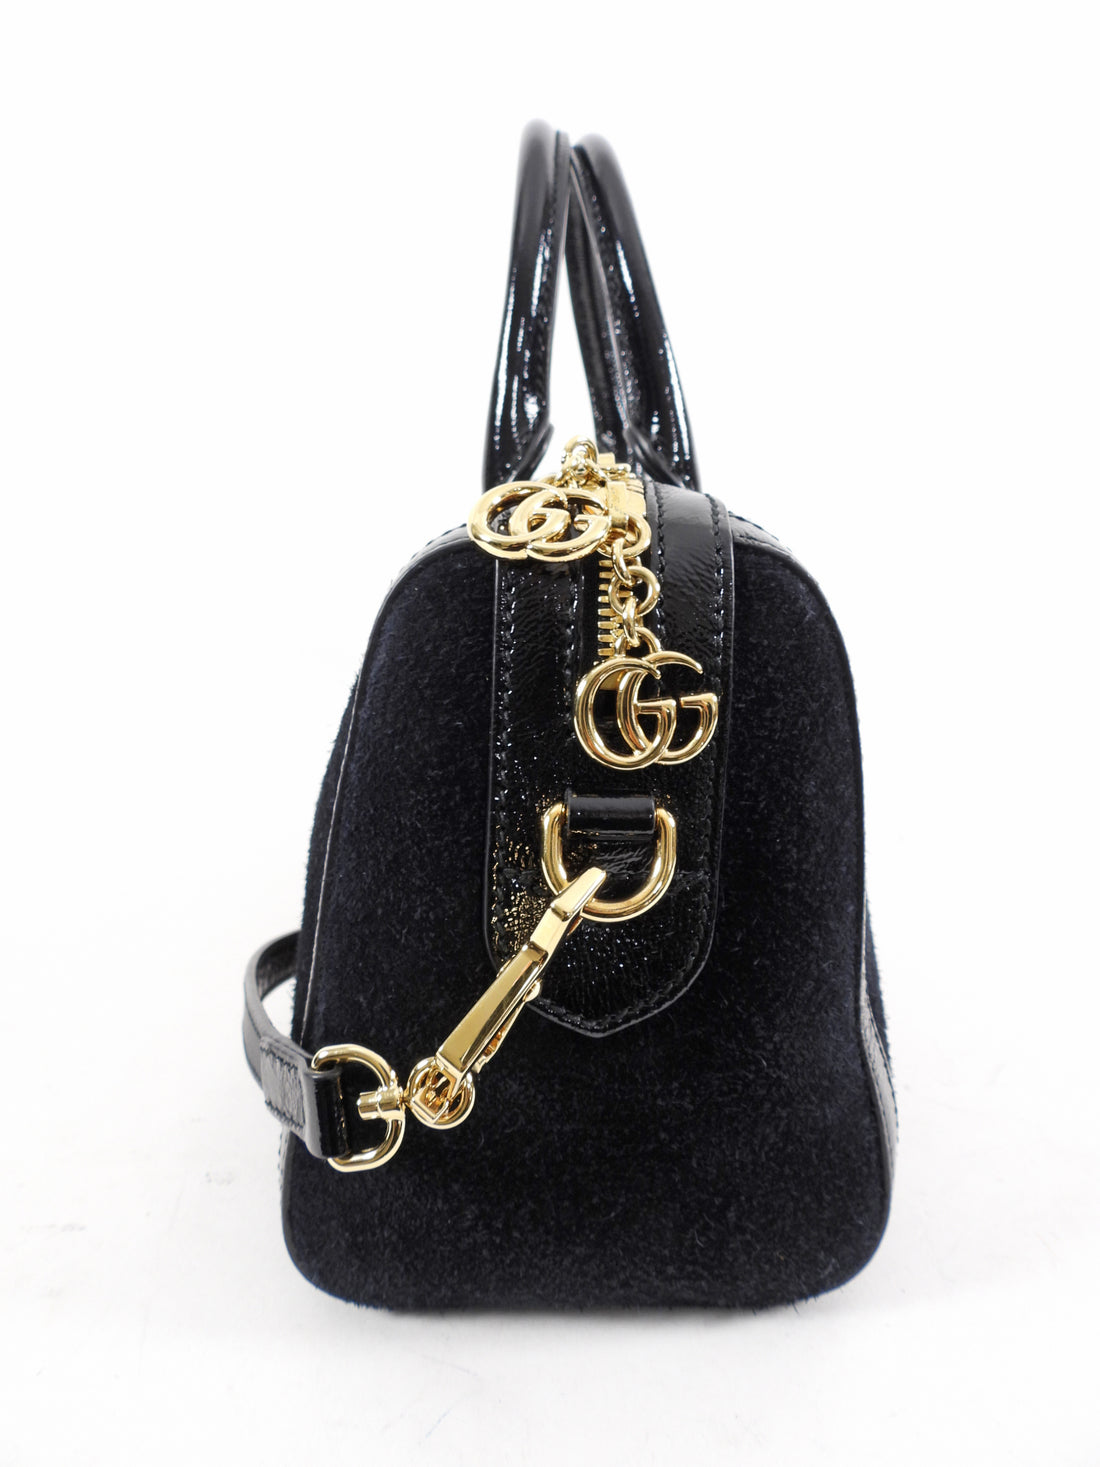 Gucci Black Suede and Patent Ophidia Doctor Bag